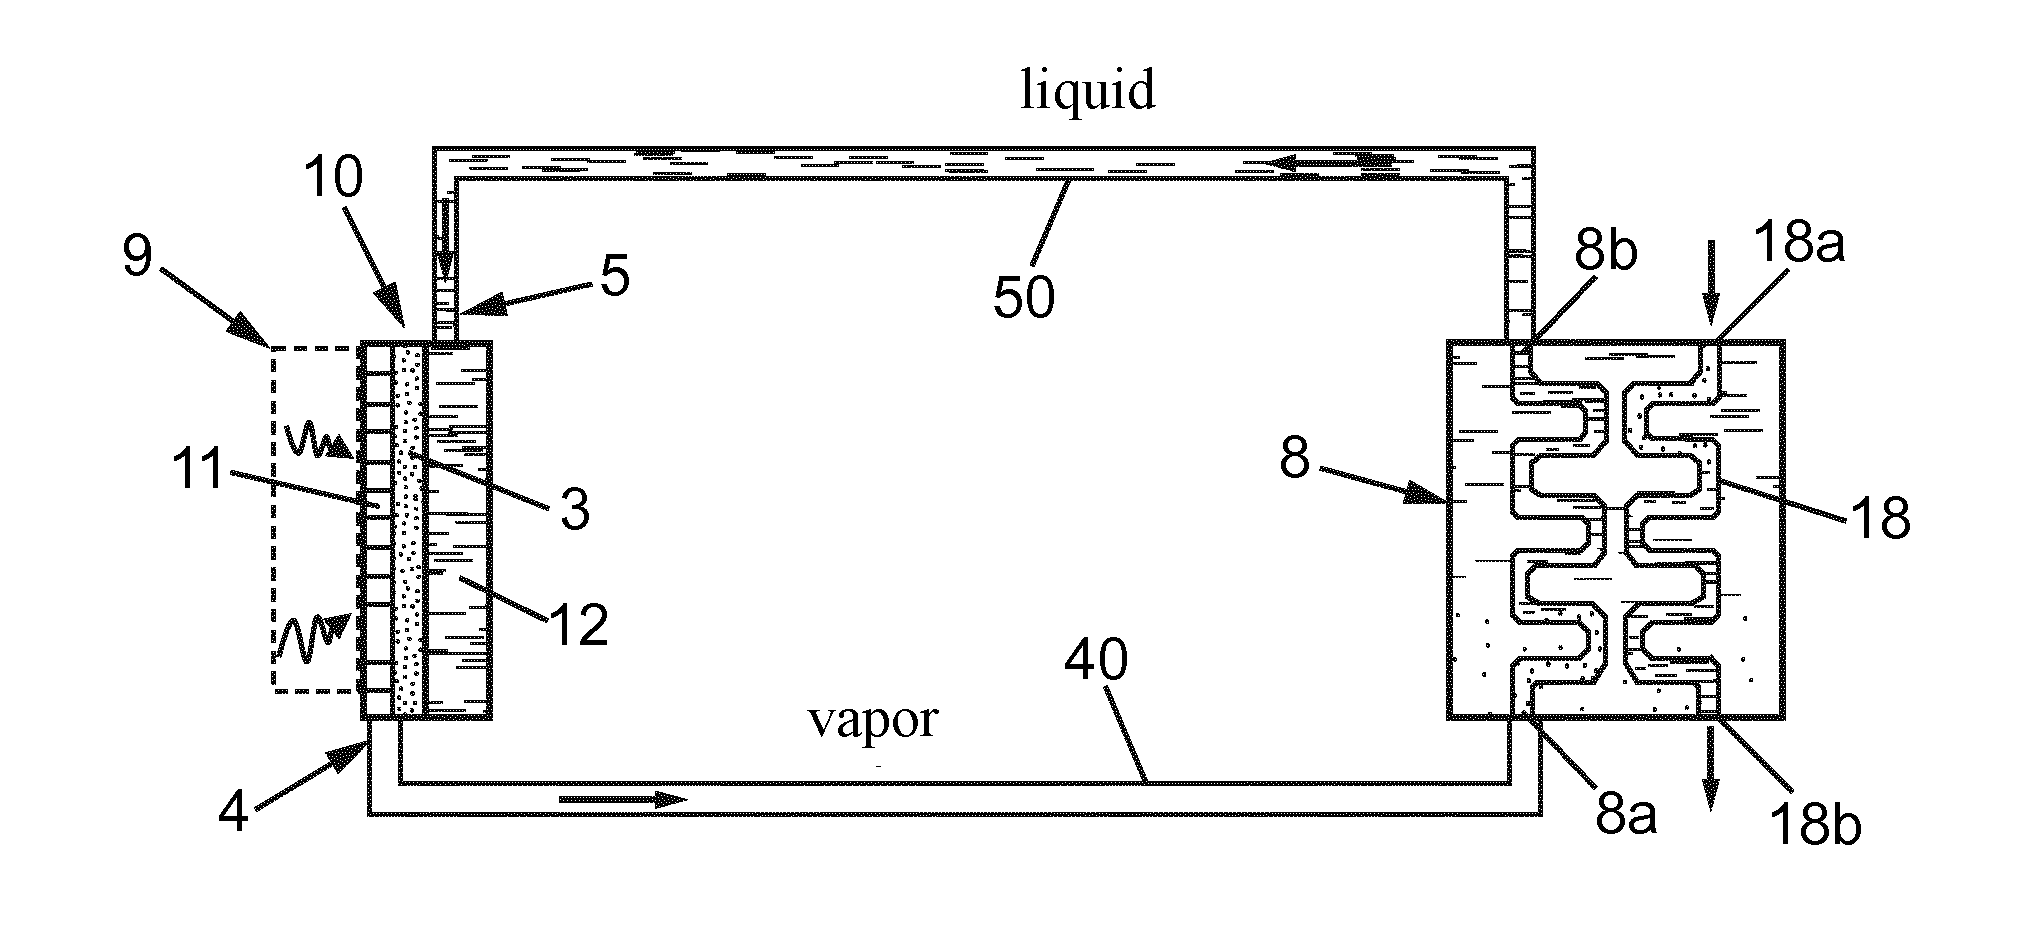 Evaporator with simplified assembly for diphasic loop